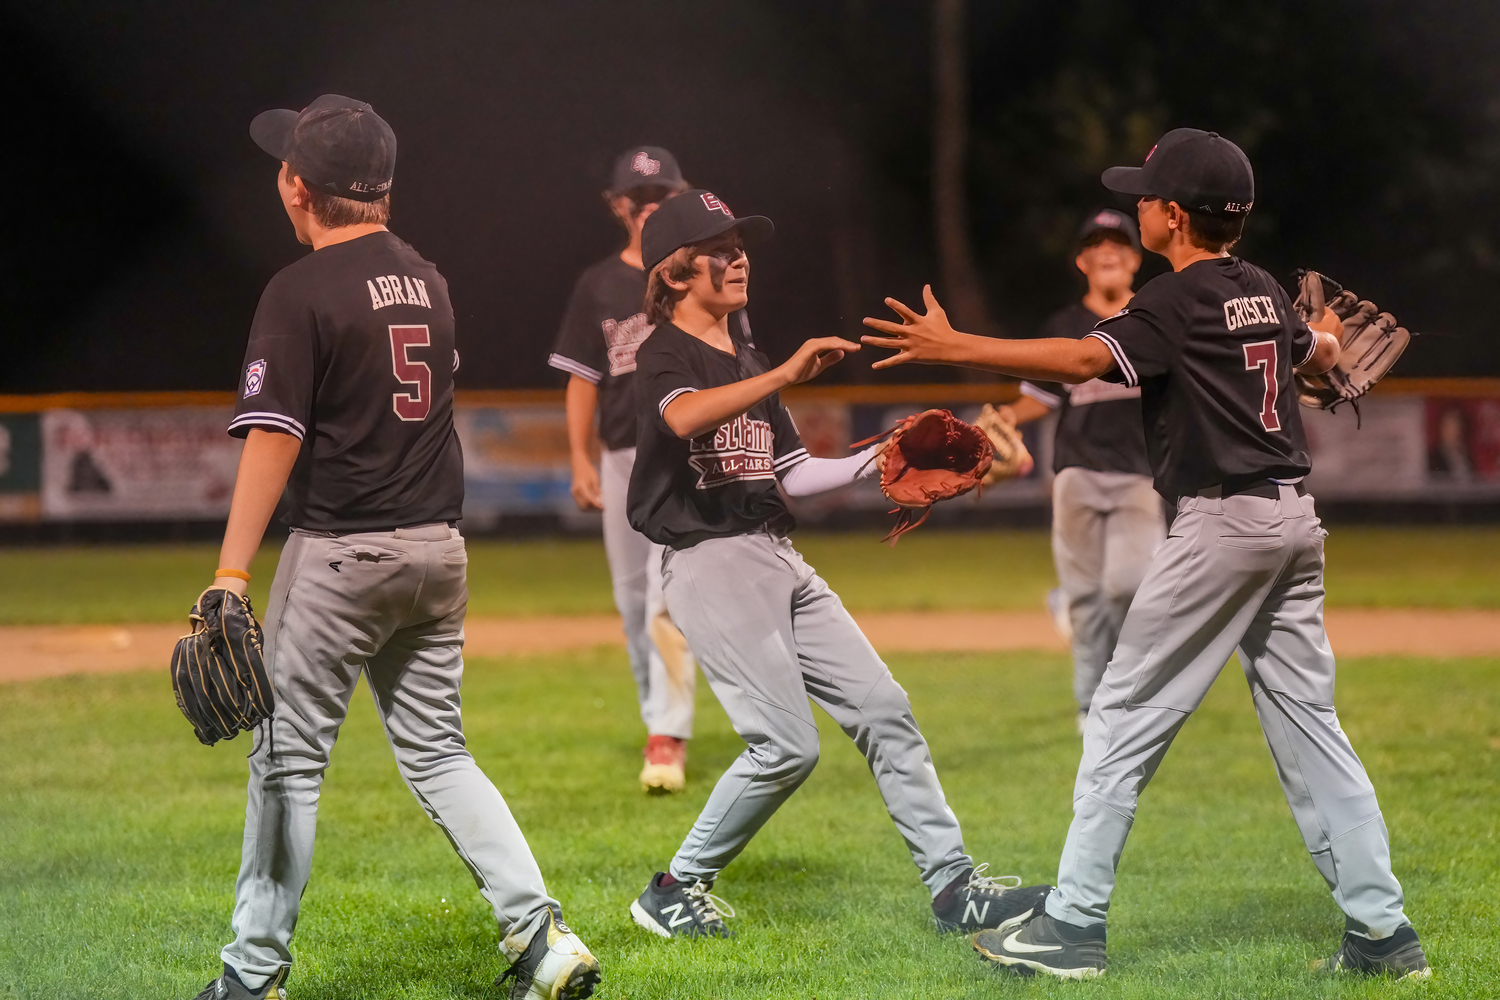 East Hampton's 12U All-Stars are pumped up following their 4-0 victory over North Shore on Thursday night that advanced them to the District 36 Championship. RON ESPOSITO